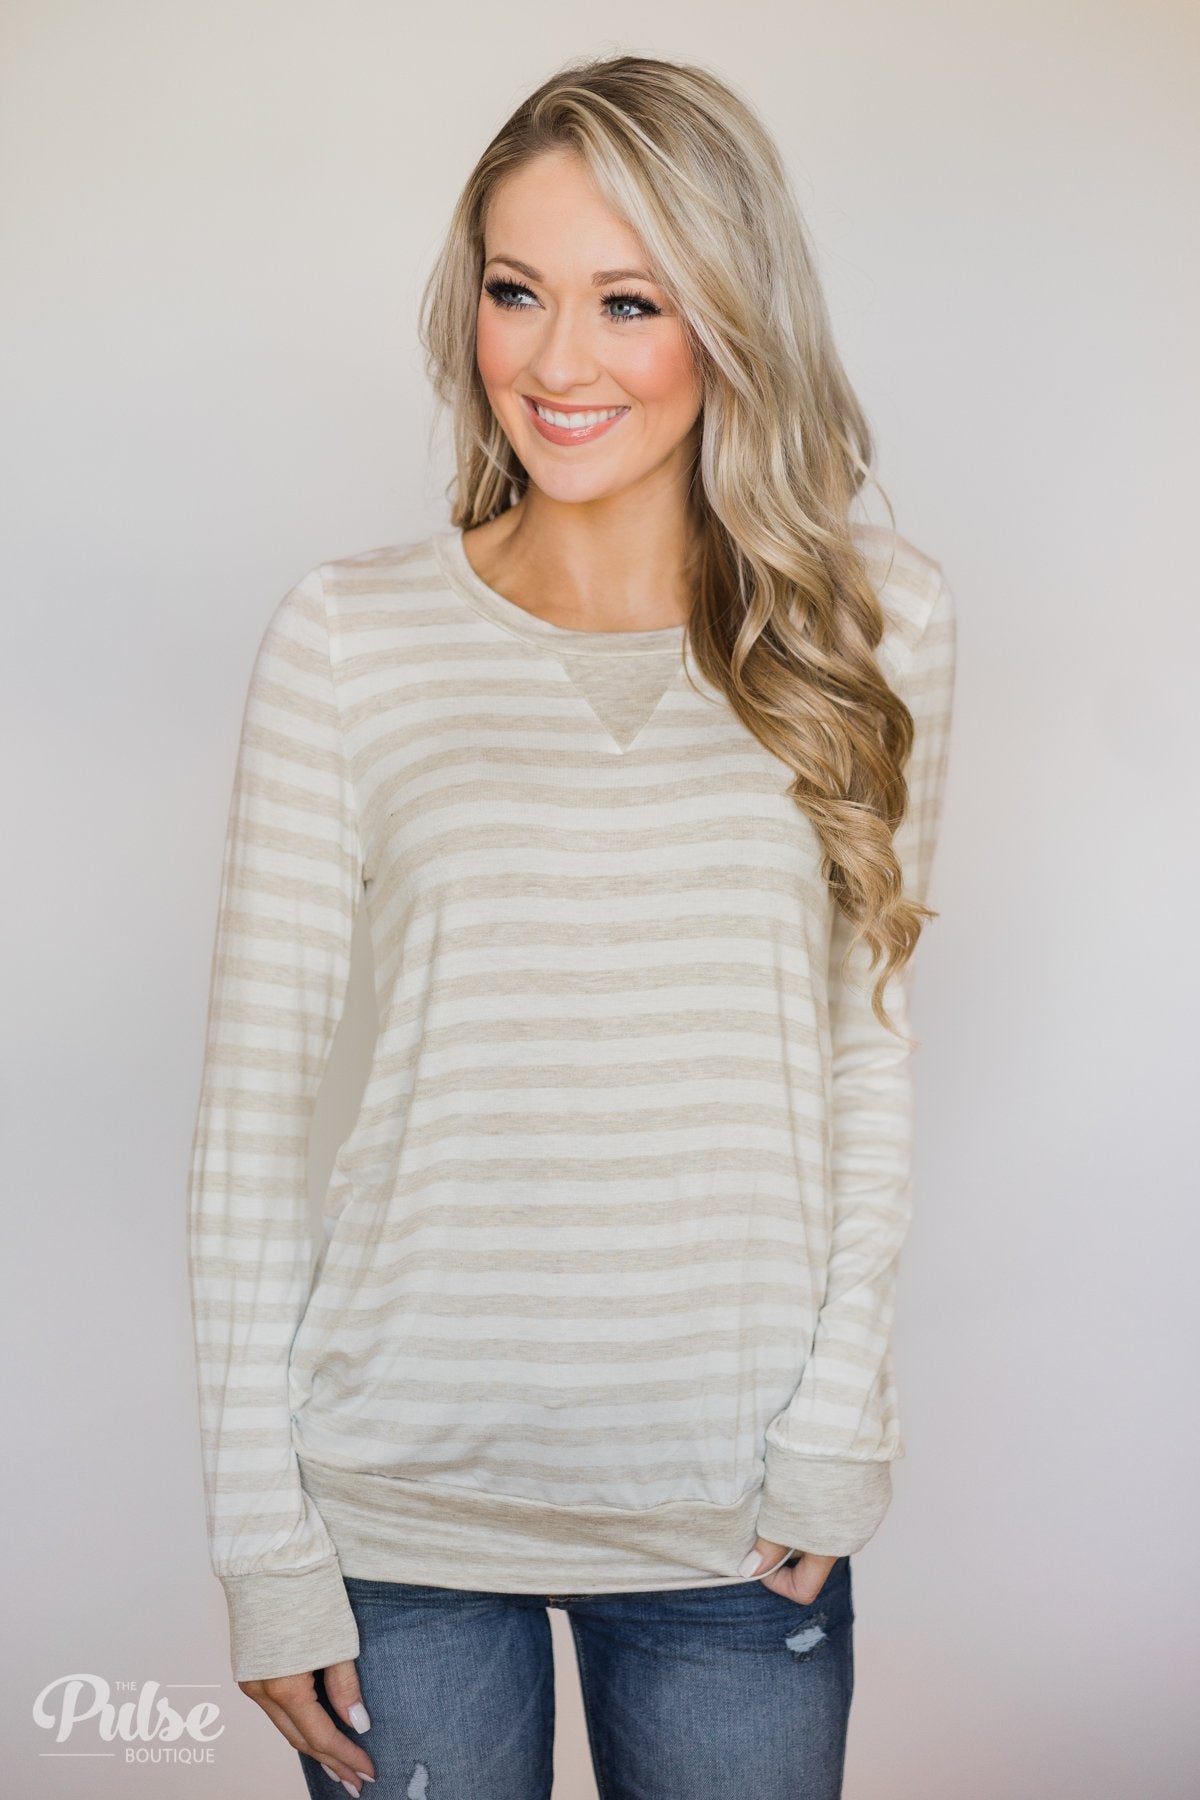 My Basic Necessity Striped Top- Oatmeal